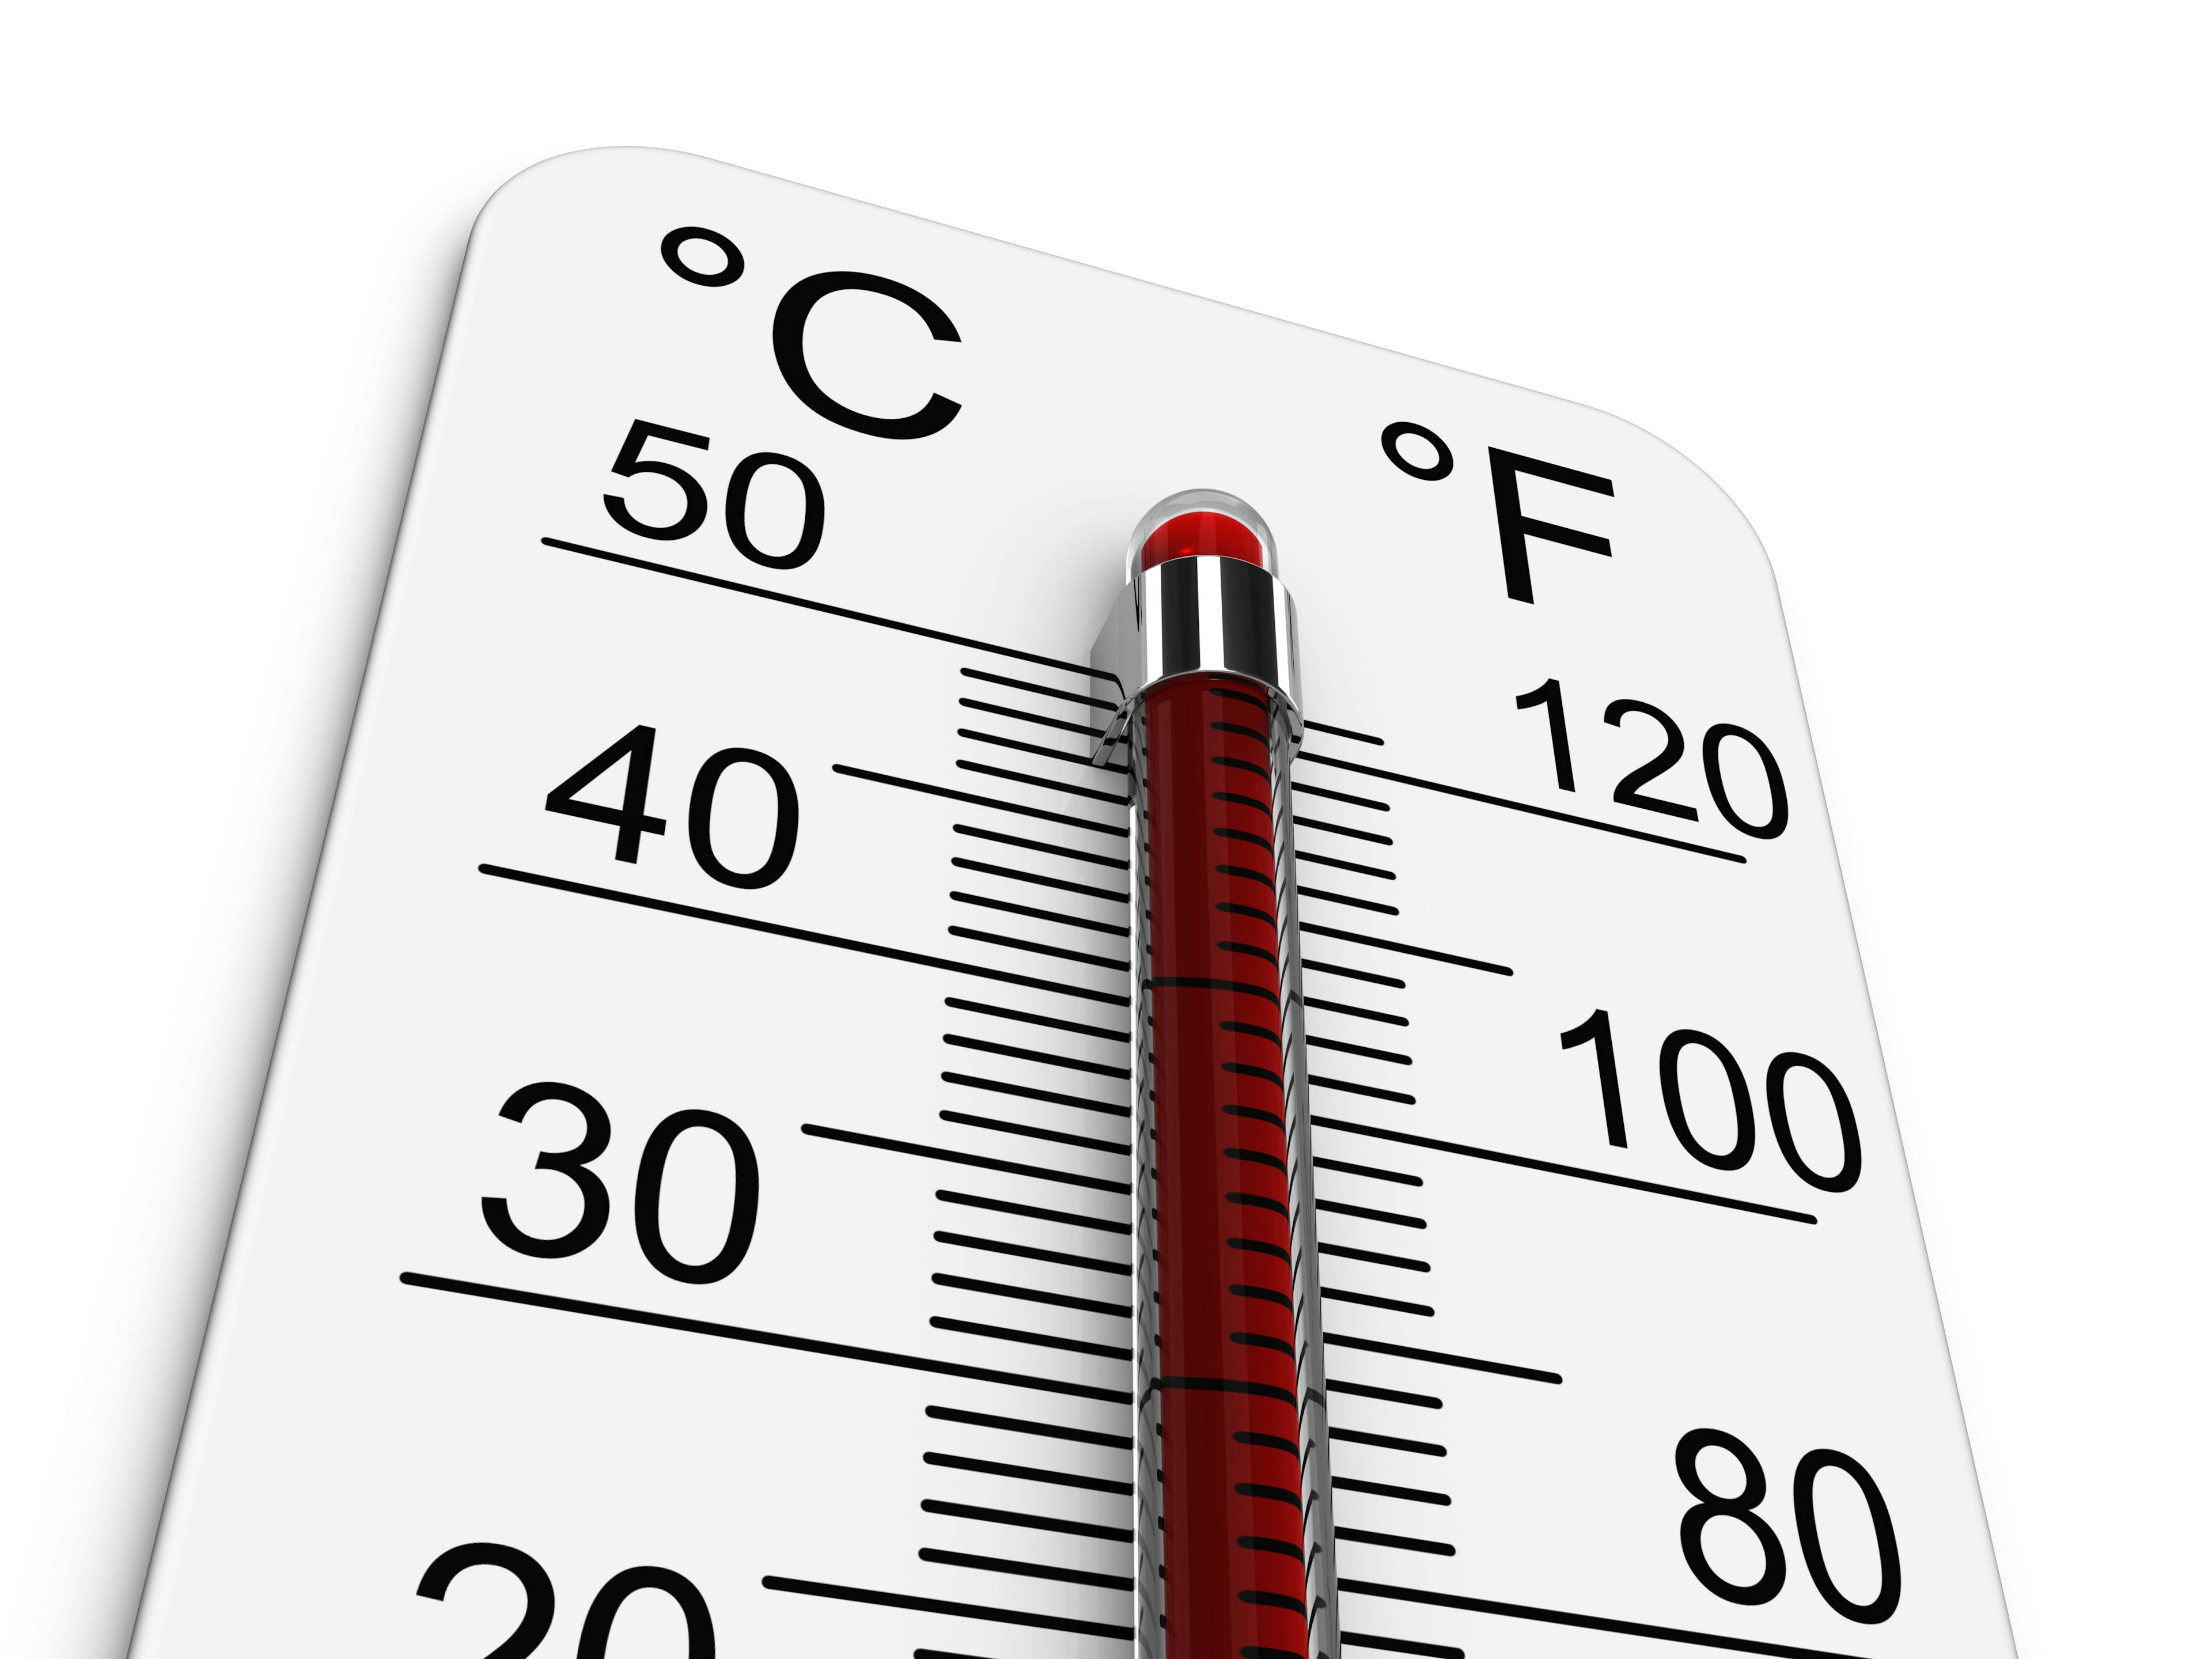 Thermometer indicates extremely high temperature | Image Credit: © D.R.3D - stock.adobe.com